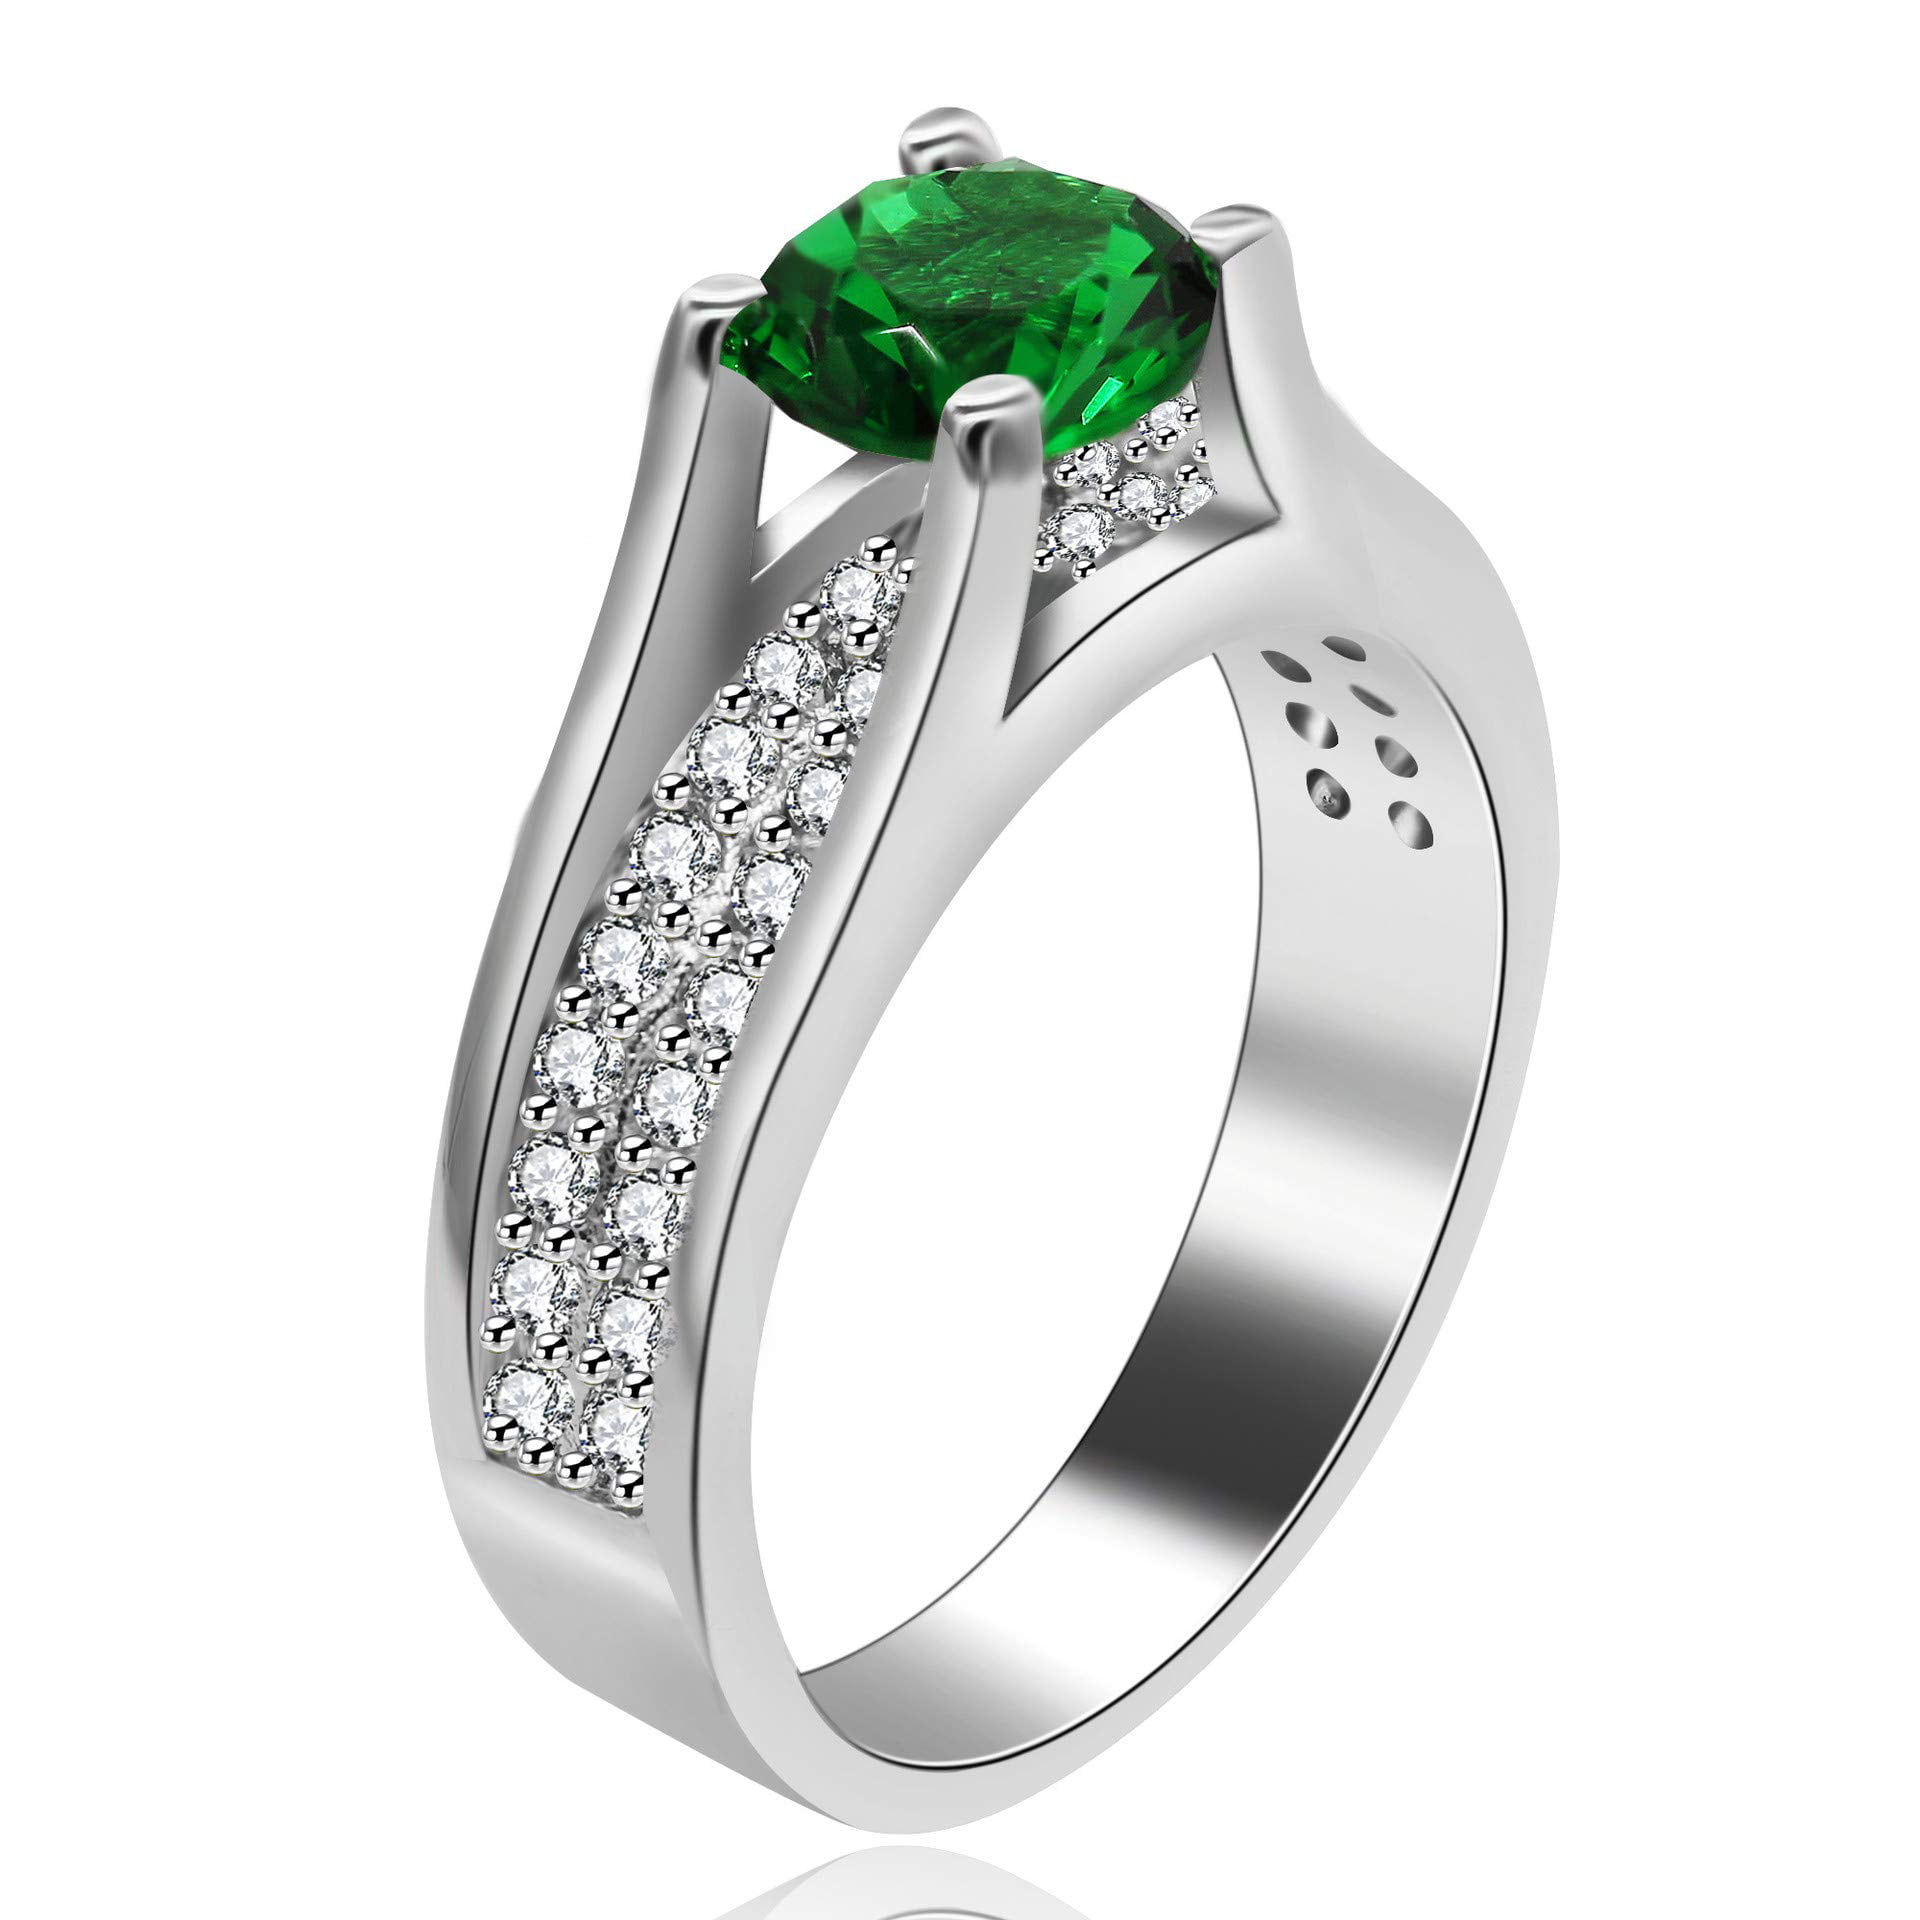 Details about   2.89ct Emerald & Pear Cut White Diamond Engagement Wedding Ring 14K Gold Finish 